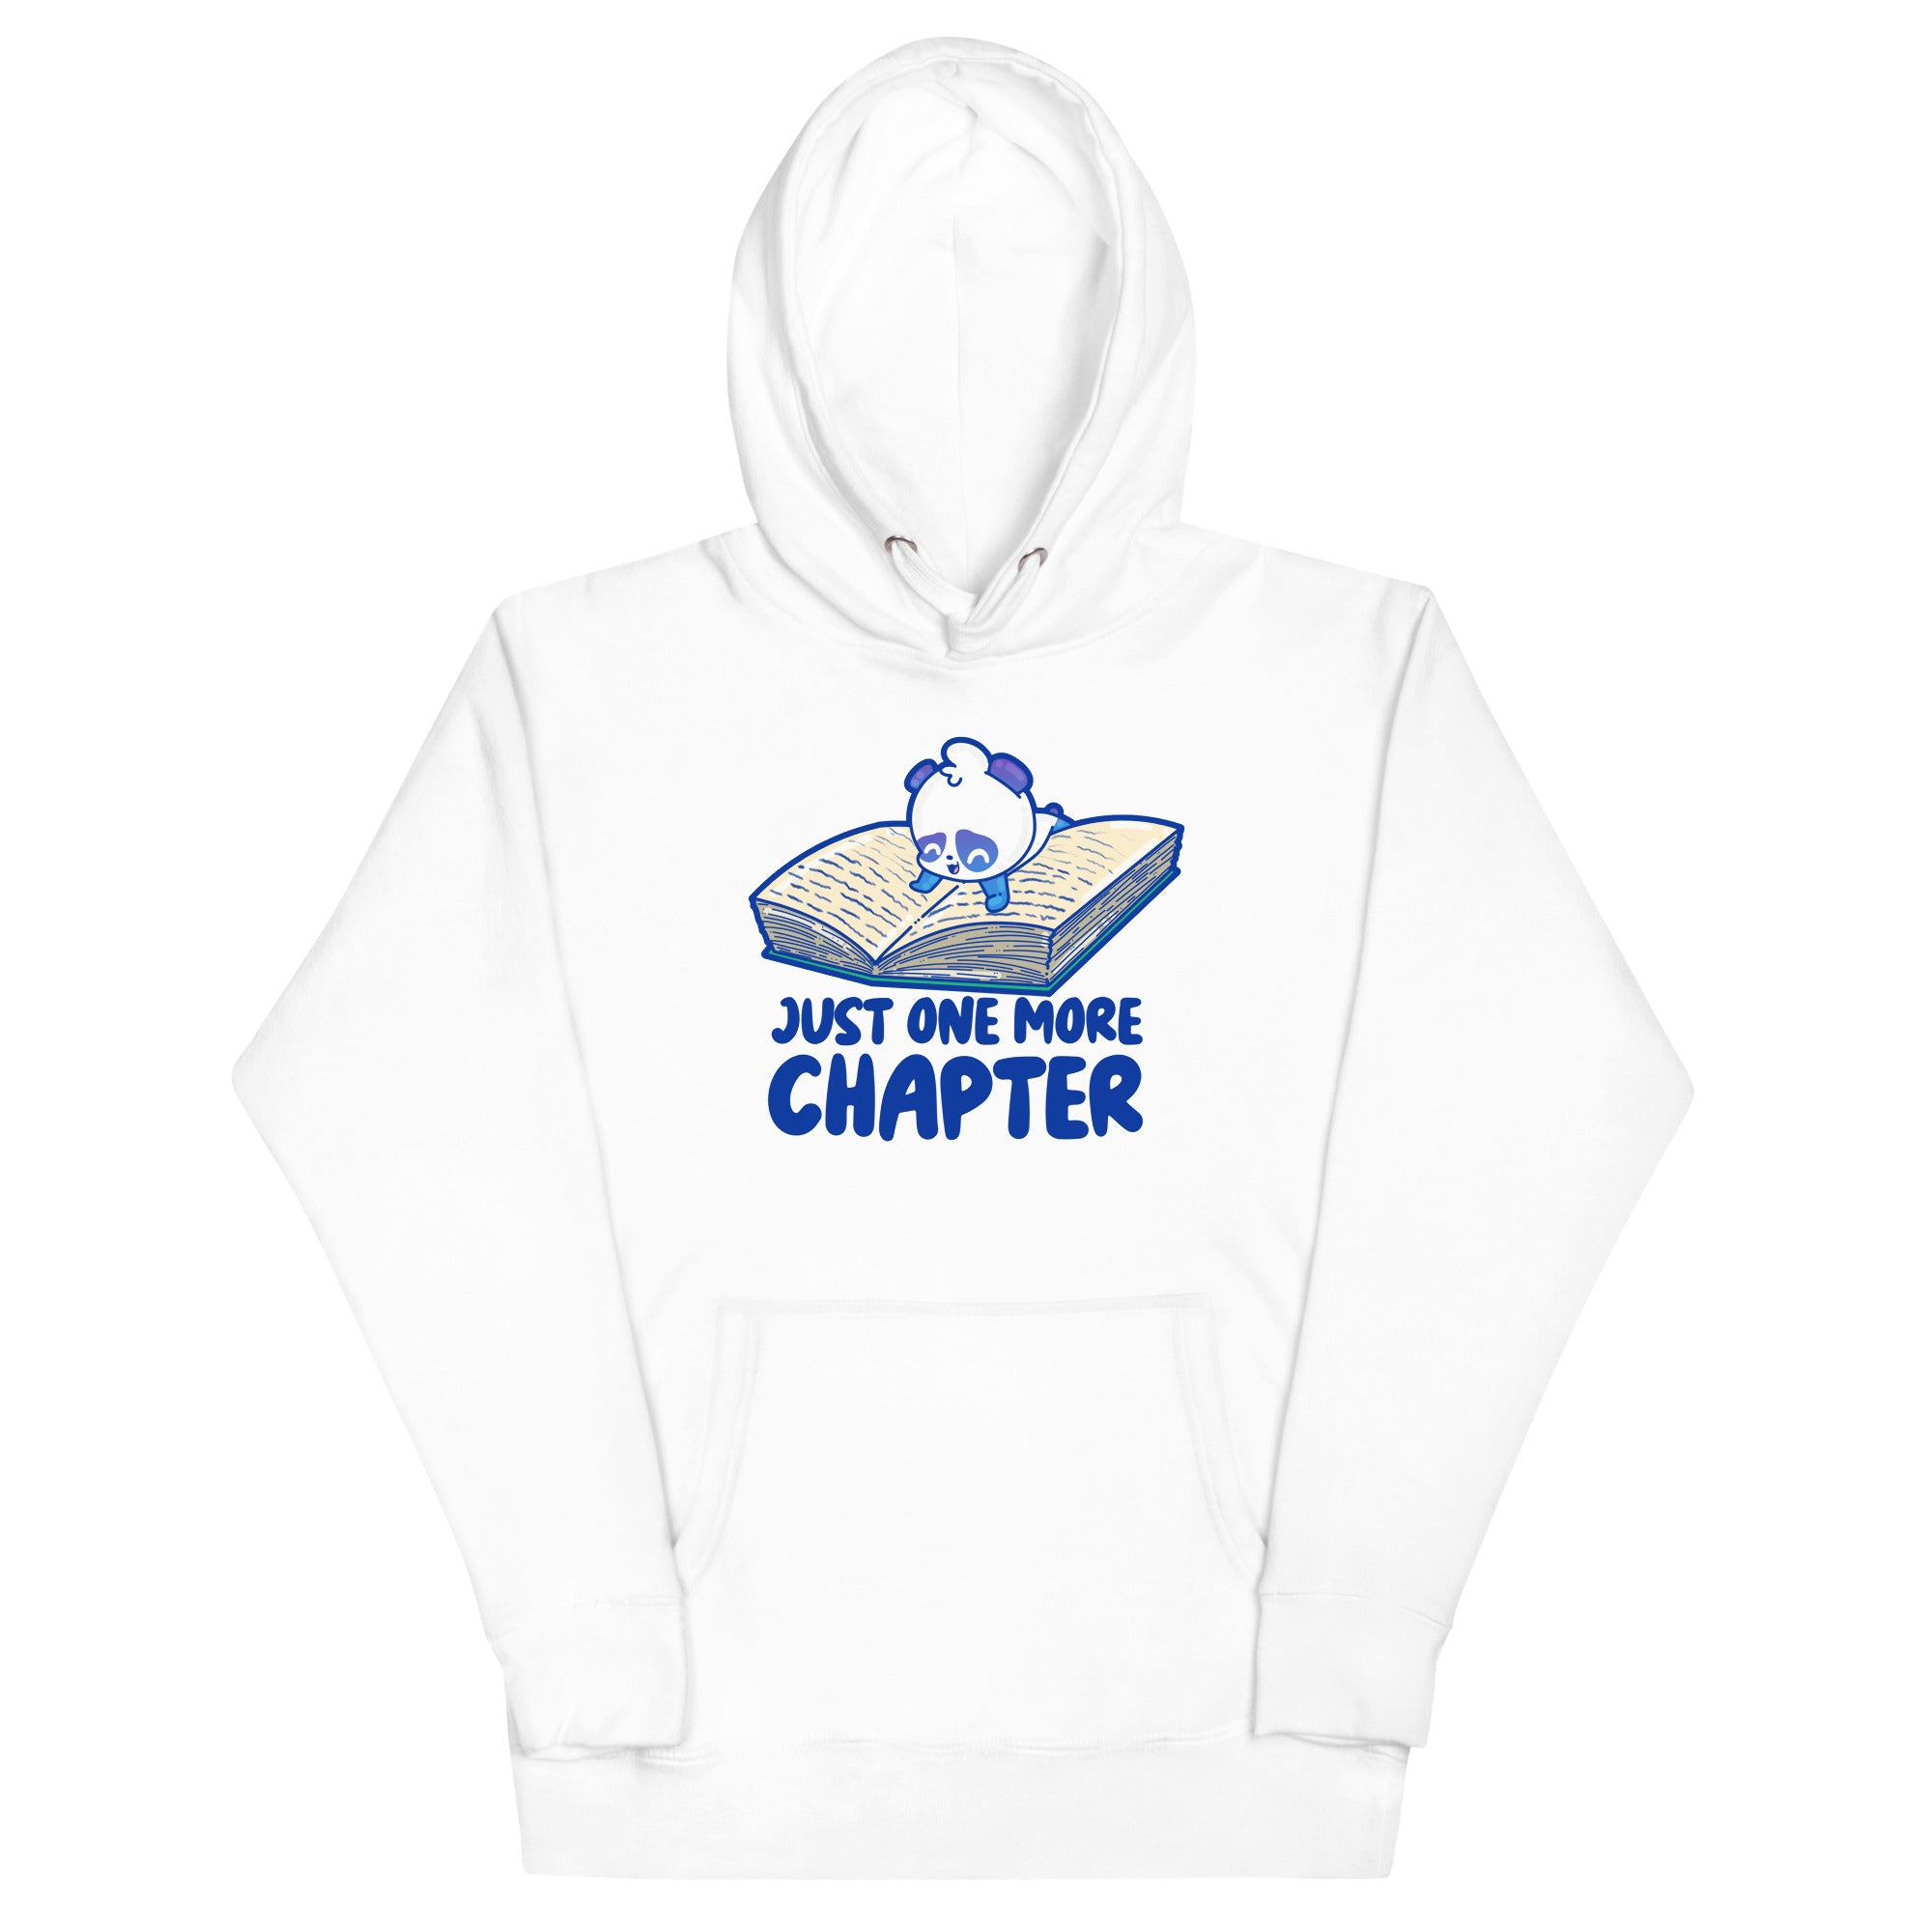 JUST ONE MORE CHAPTER - Hoodie - ChubbleGumLLC